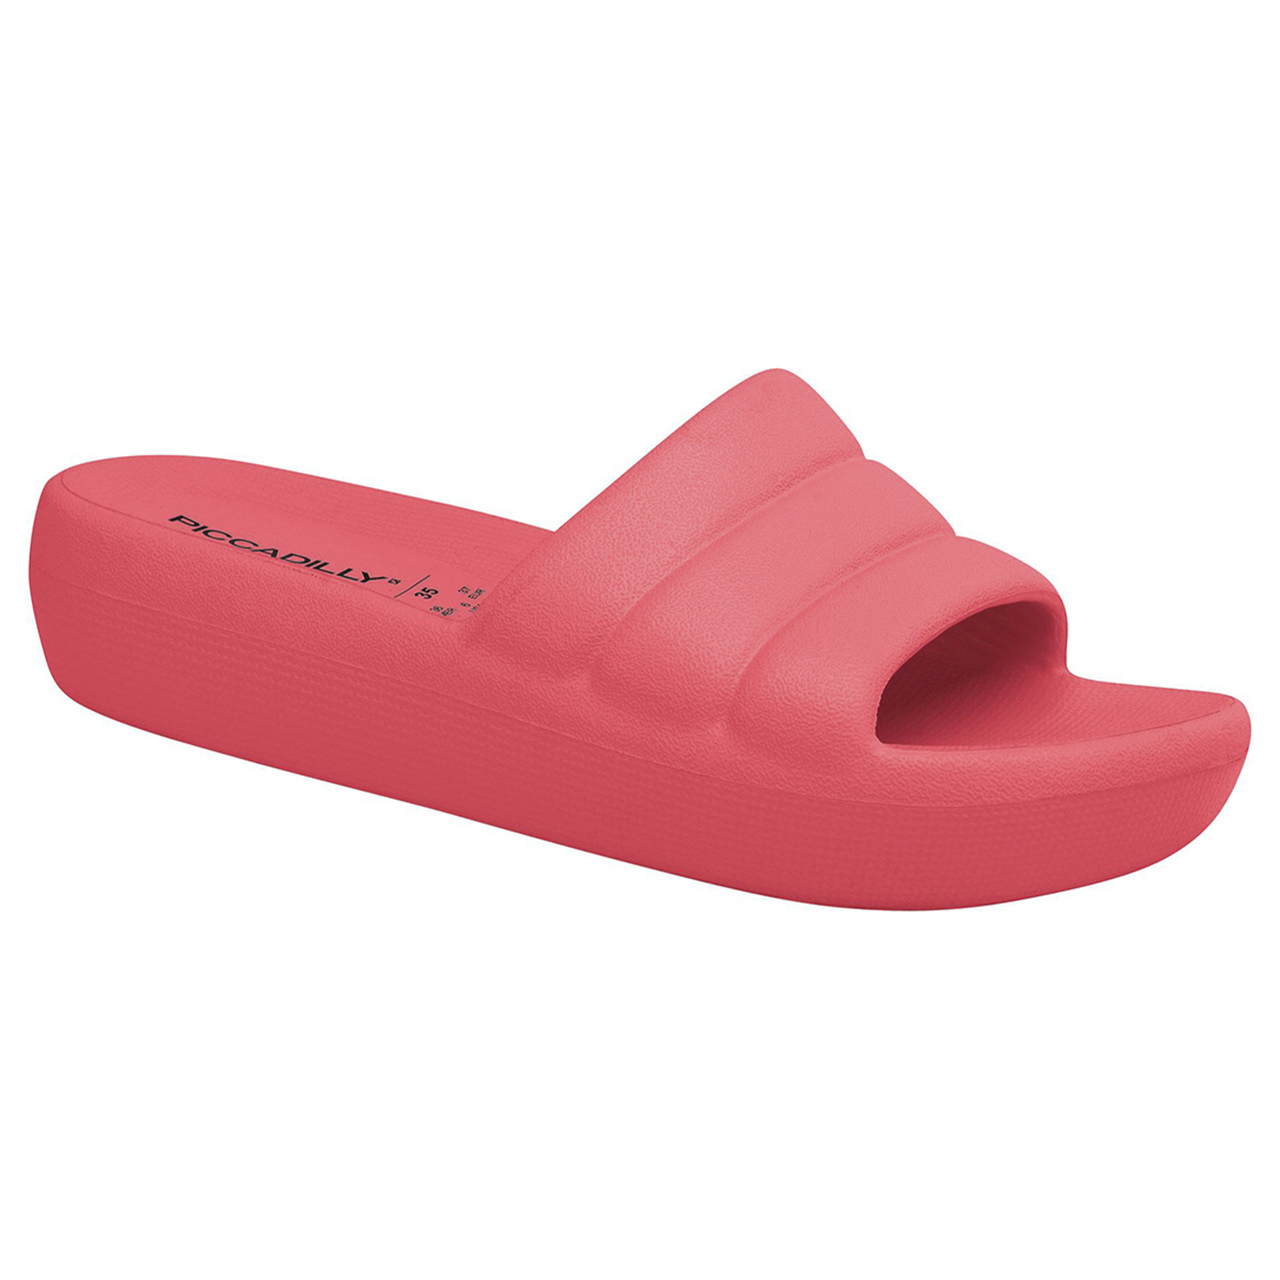 Chinelo piccadilly nuvem marshmallow slide pink 222001